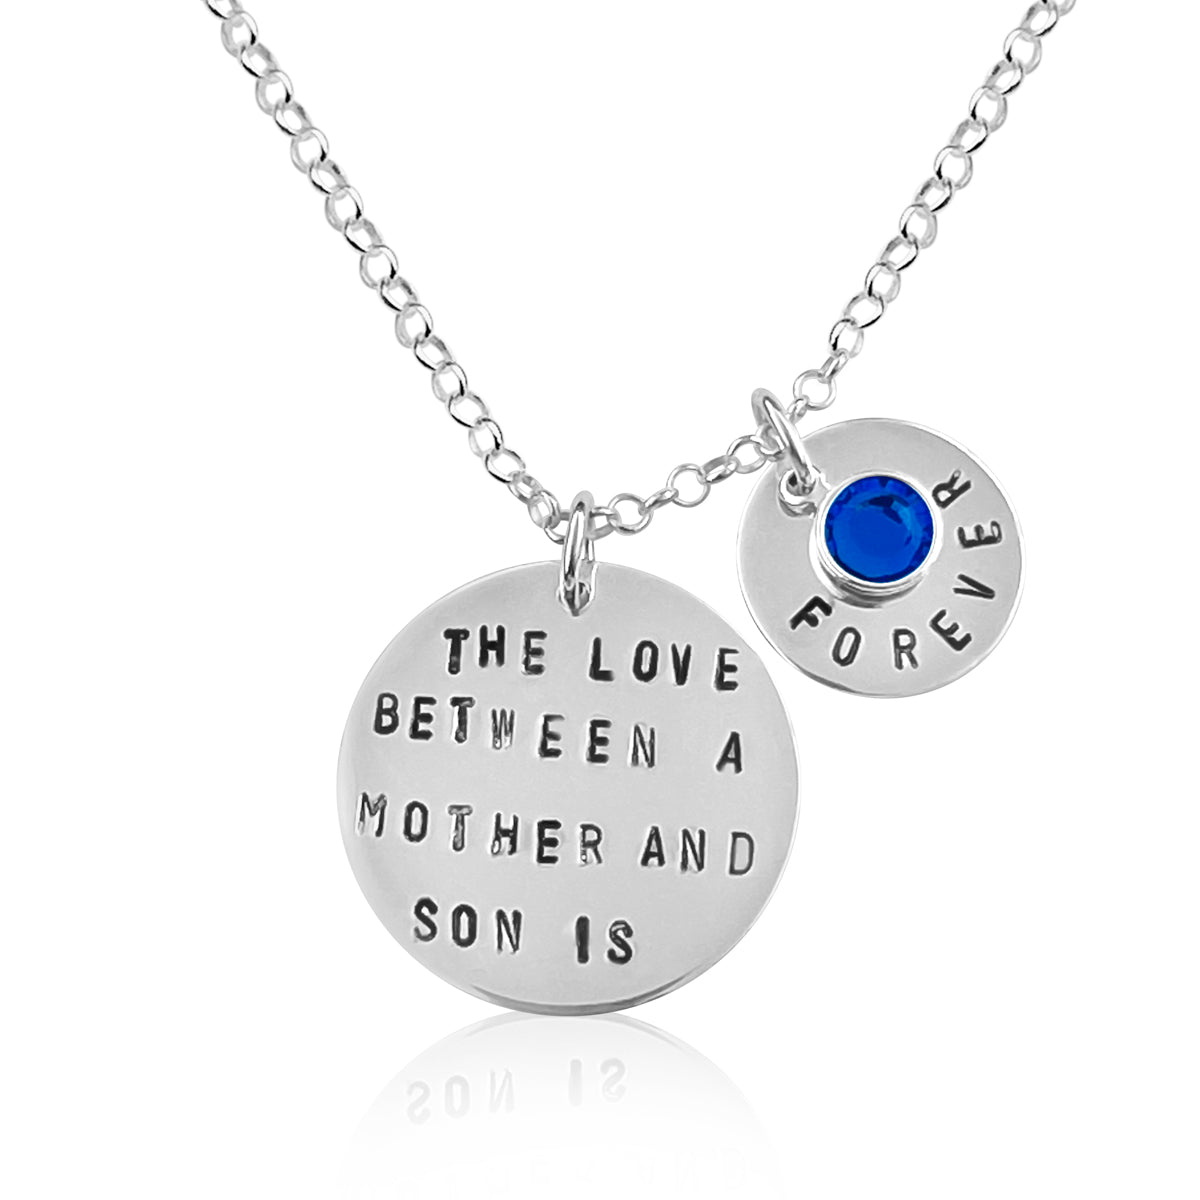 Love Between a Mother and Son is Forever Necklace